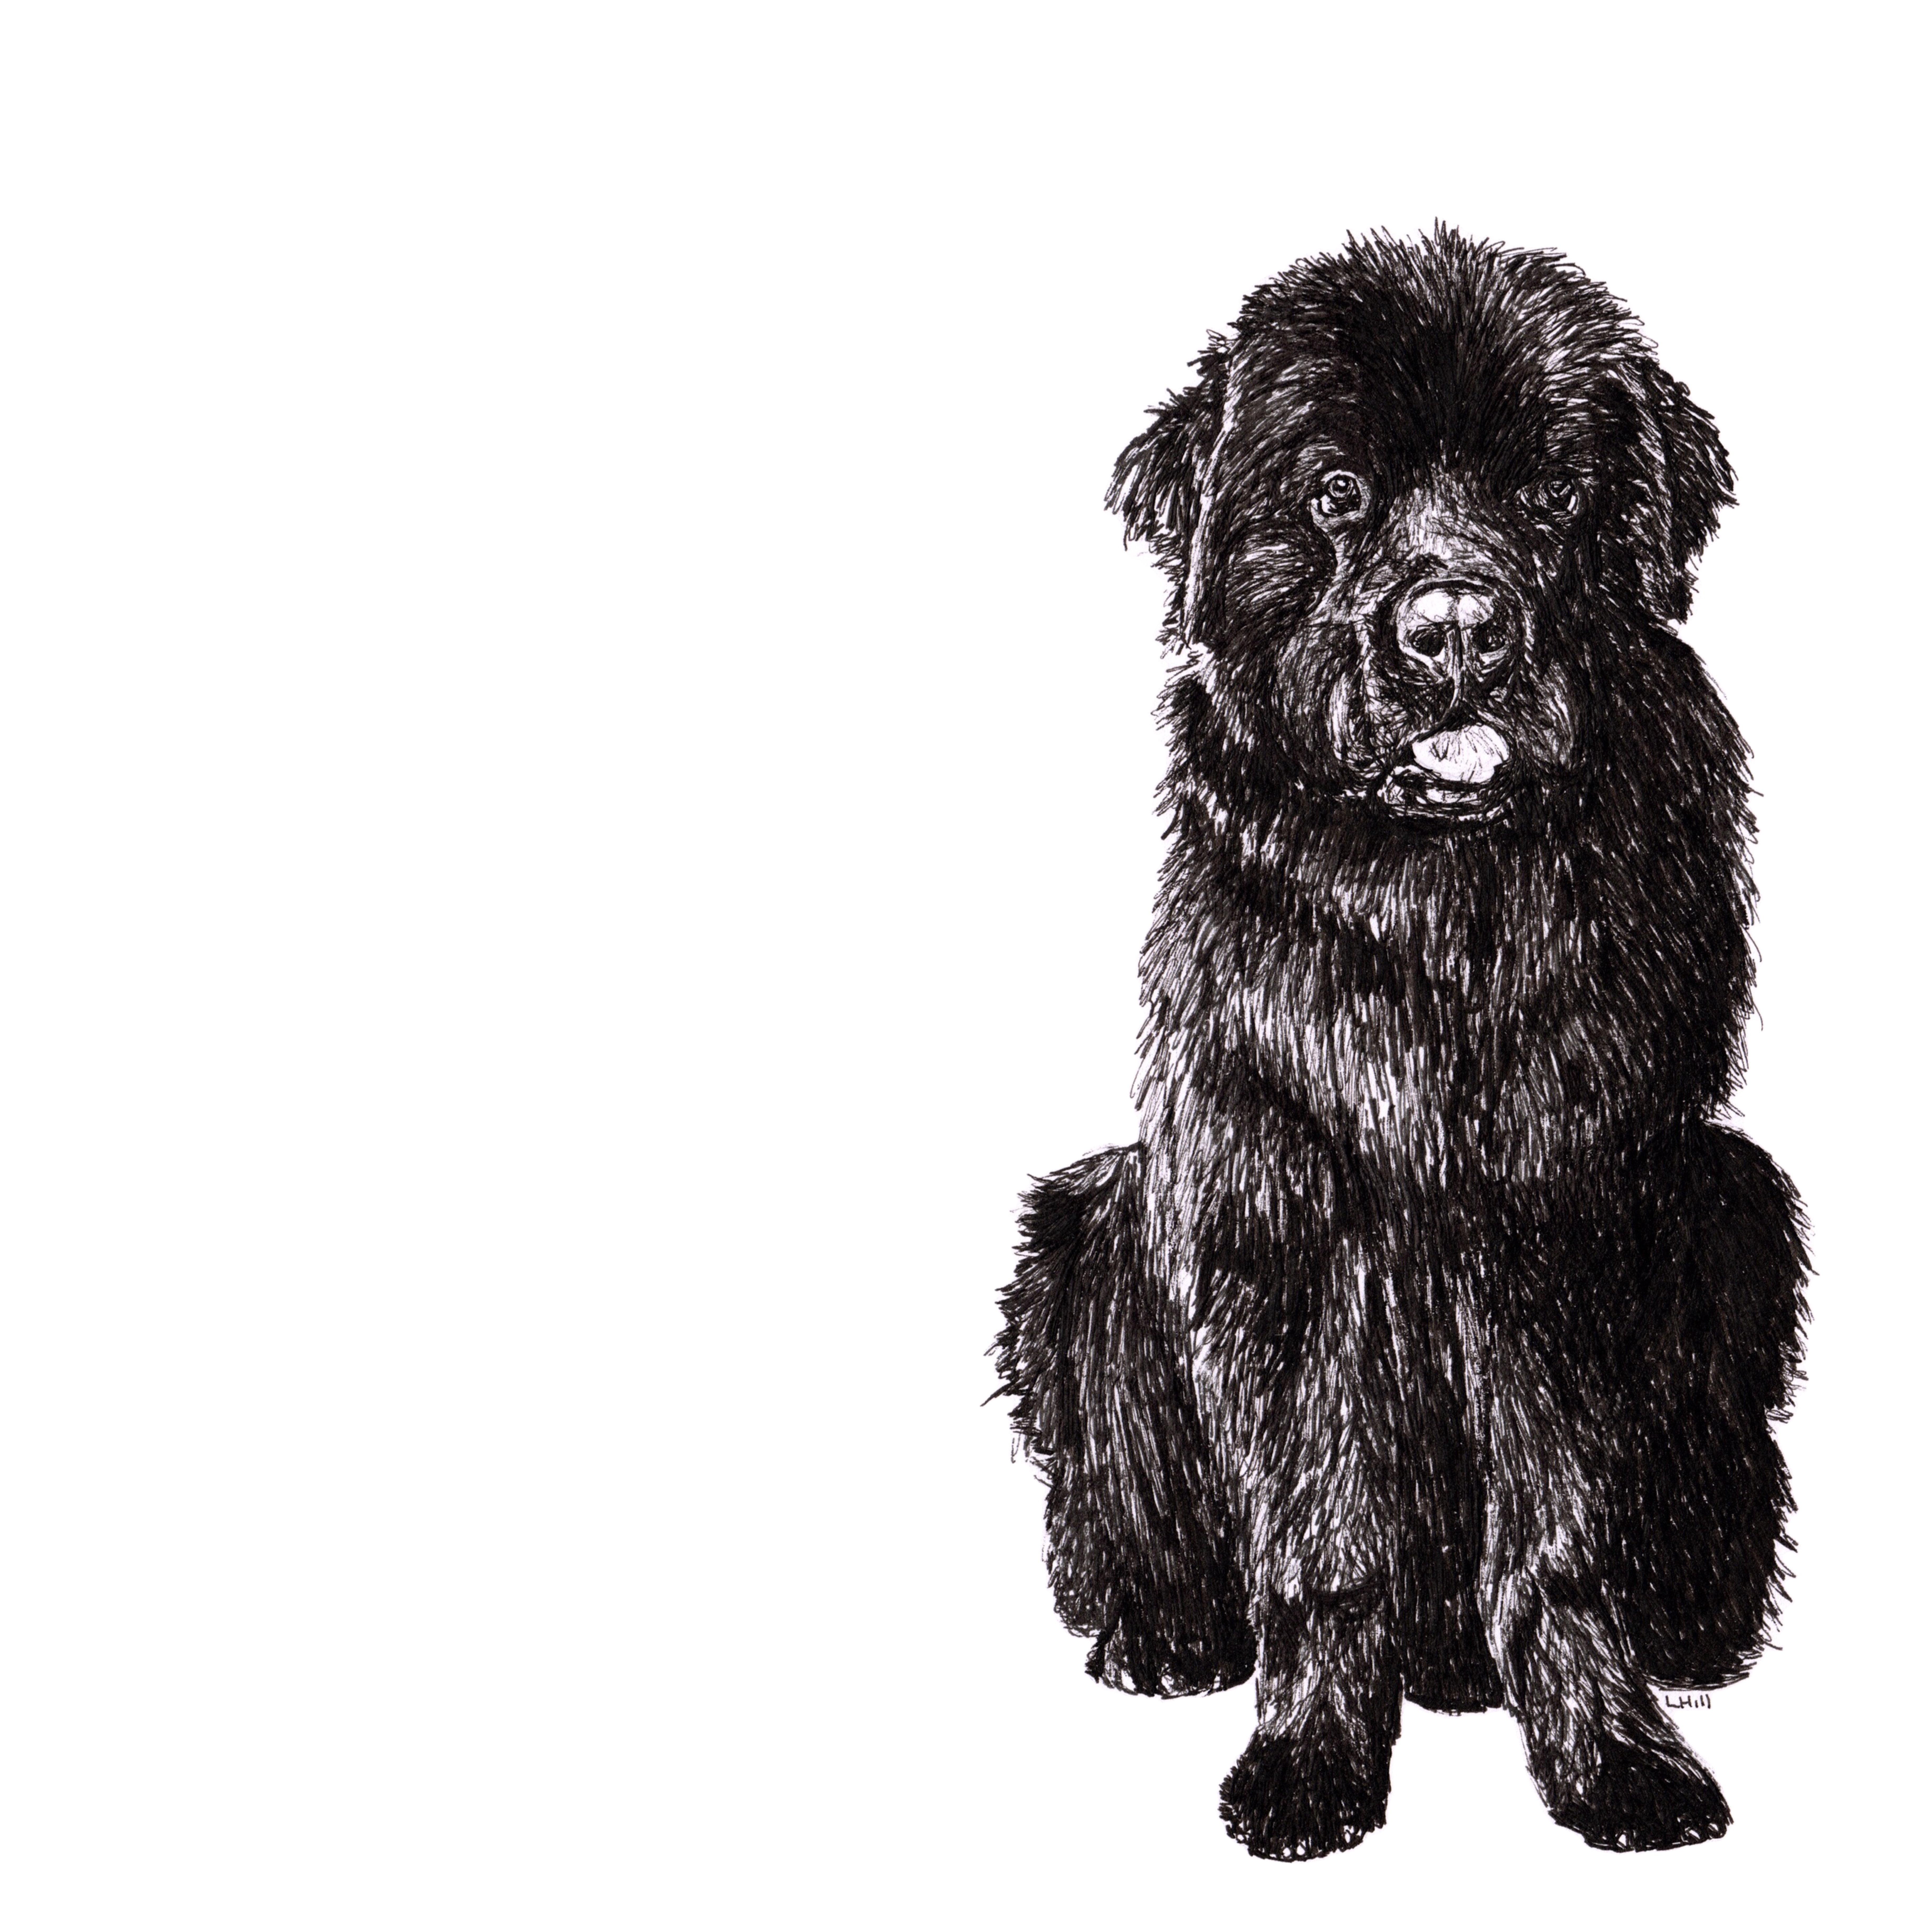 Newfoundland pen and ink illustration by Louisa Hill